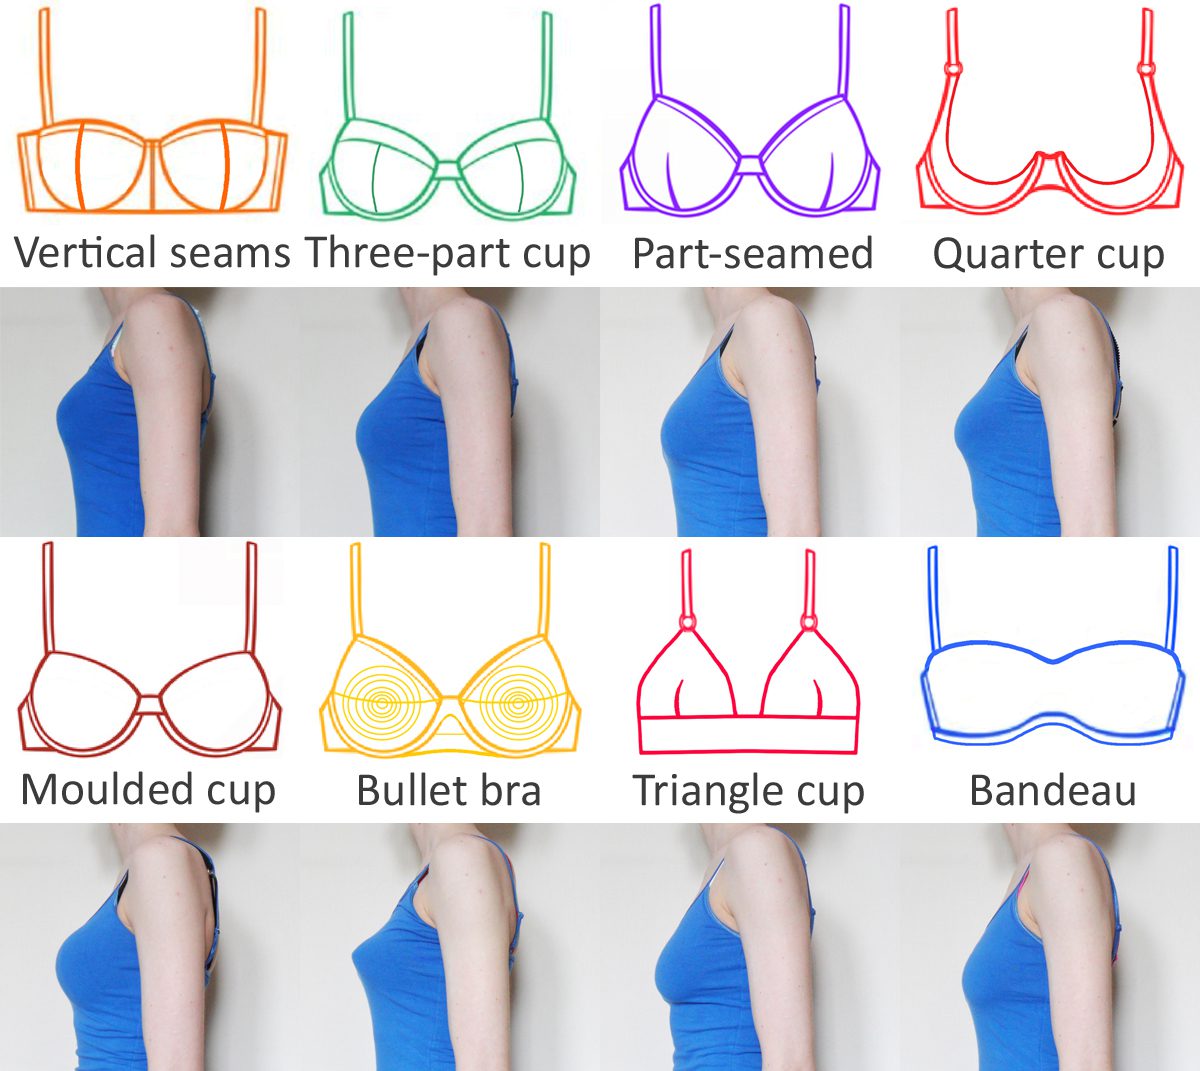 Lueur Lingerie - A quick comparison between a Seamed bra and a